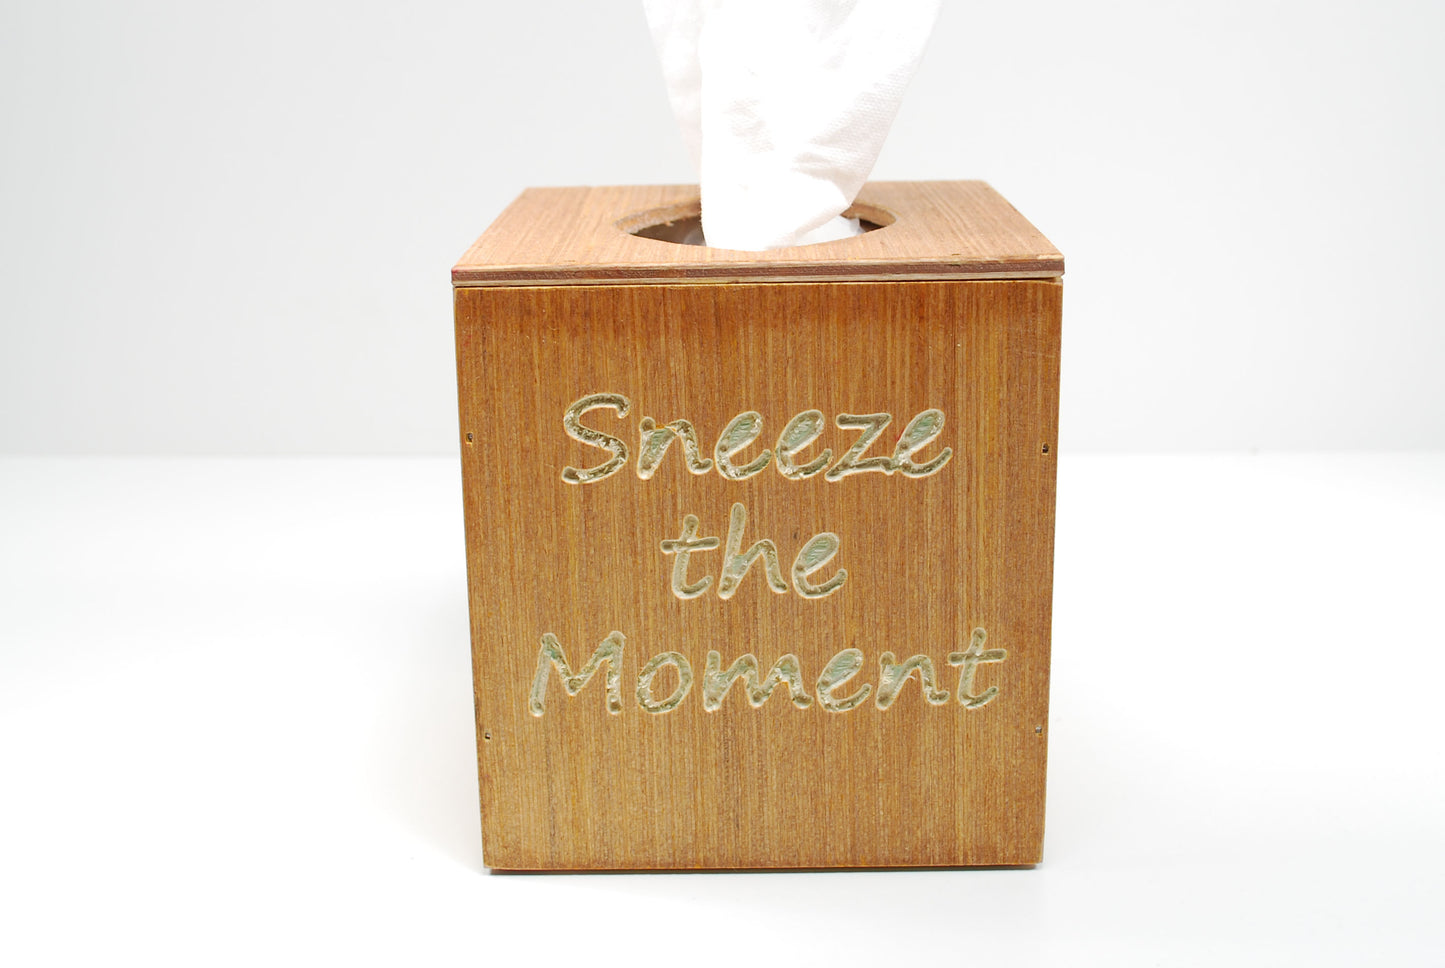 Sneeze the Moment Wood Tissue Box Cover